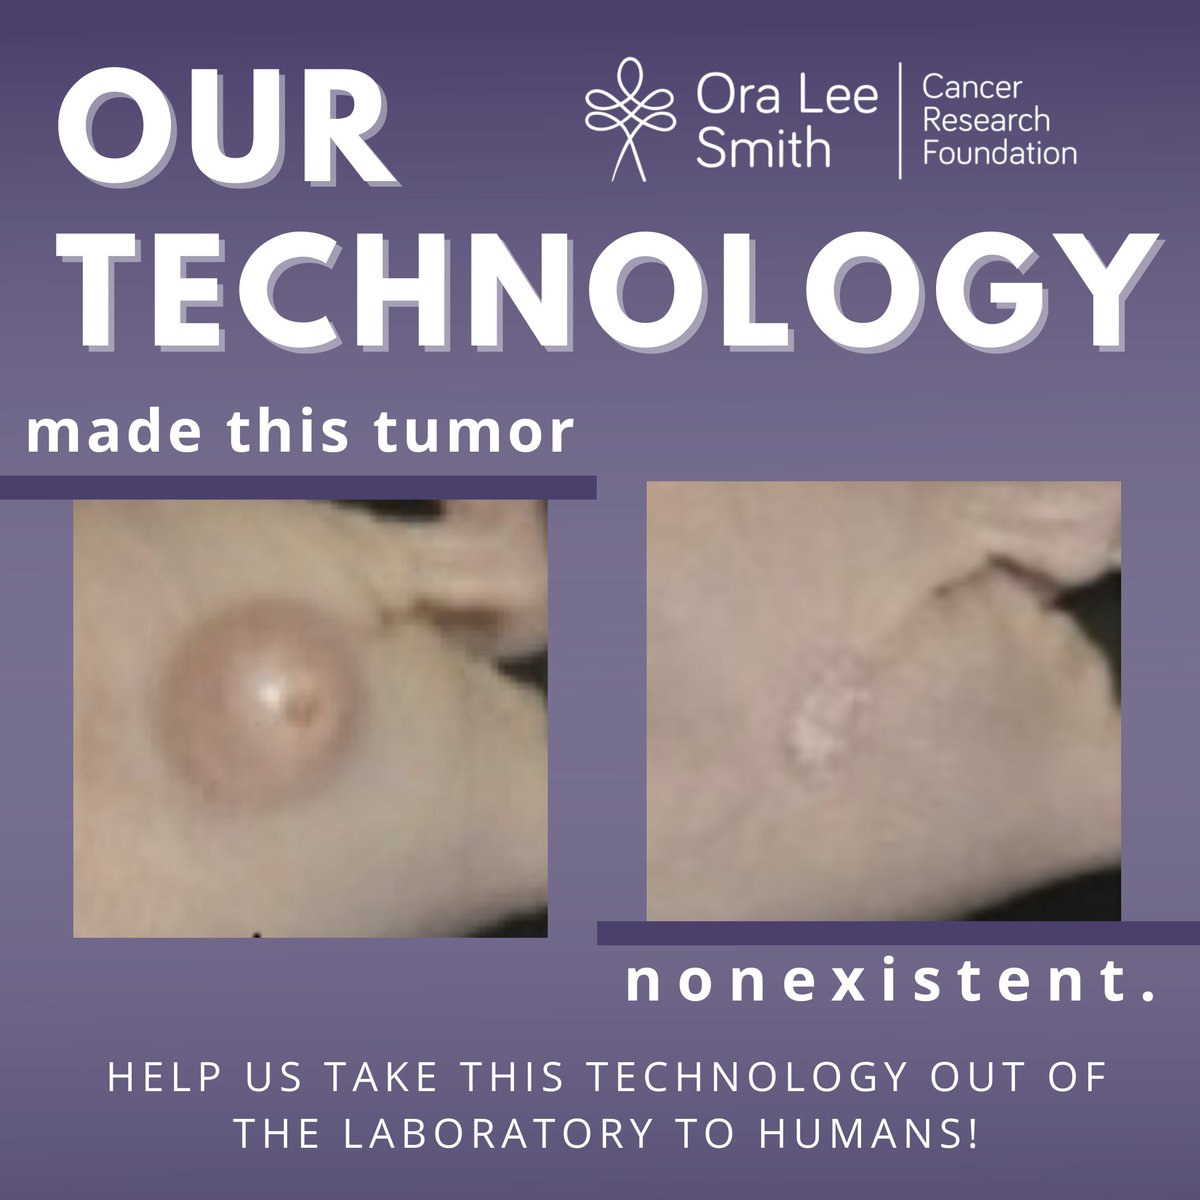 Founded by @Dr. Hadiyah-Nicole Green, @OraLee.org has cancer-killing #tech that eliminates tumors in lab mice after one 10-minute txt in just 15 days. Your support will fund clinical trials & keep our #tech #affordable for #all. Learn more and donate at OraLee.org.